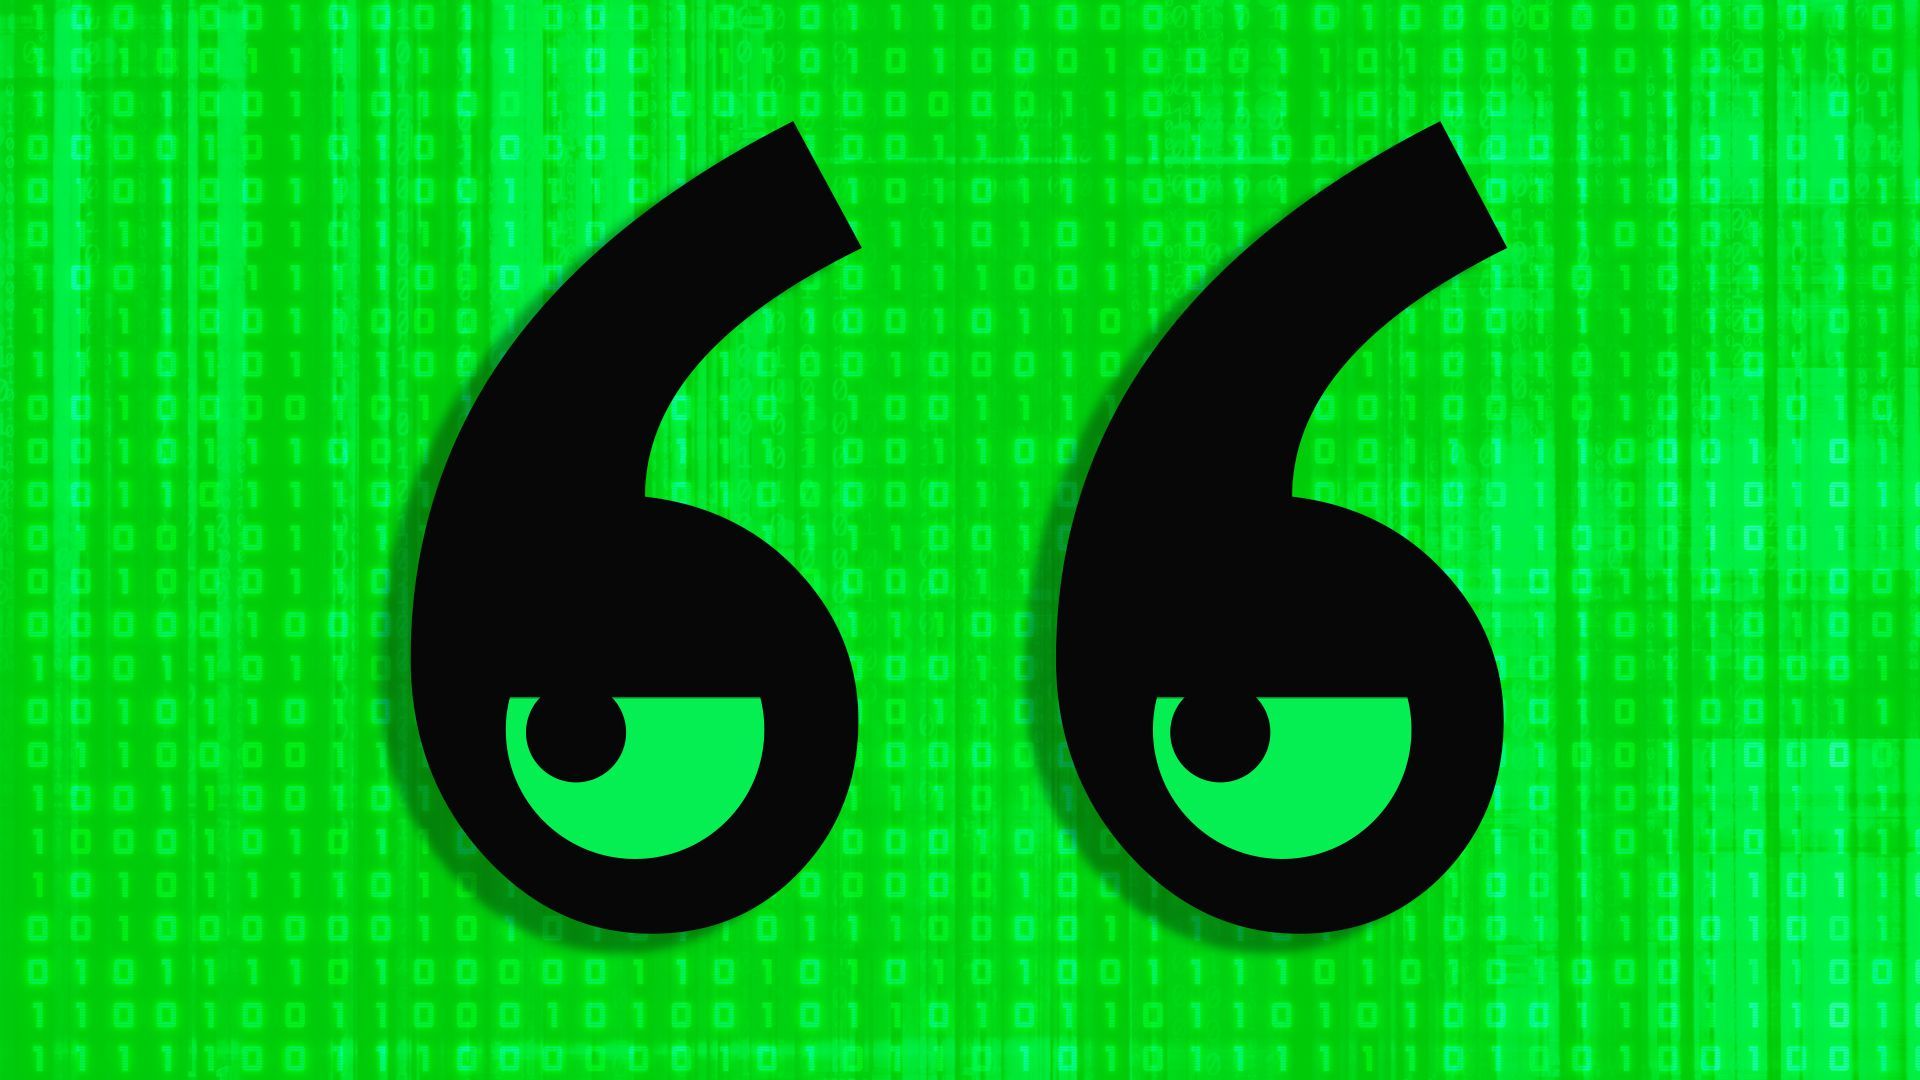 Illustration of a pair of quotation marks in the form of half-lidded side-looking eyes over a background of binary code